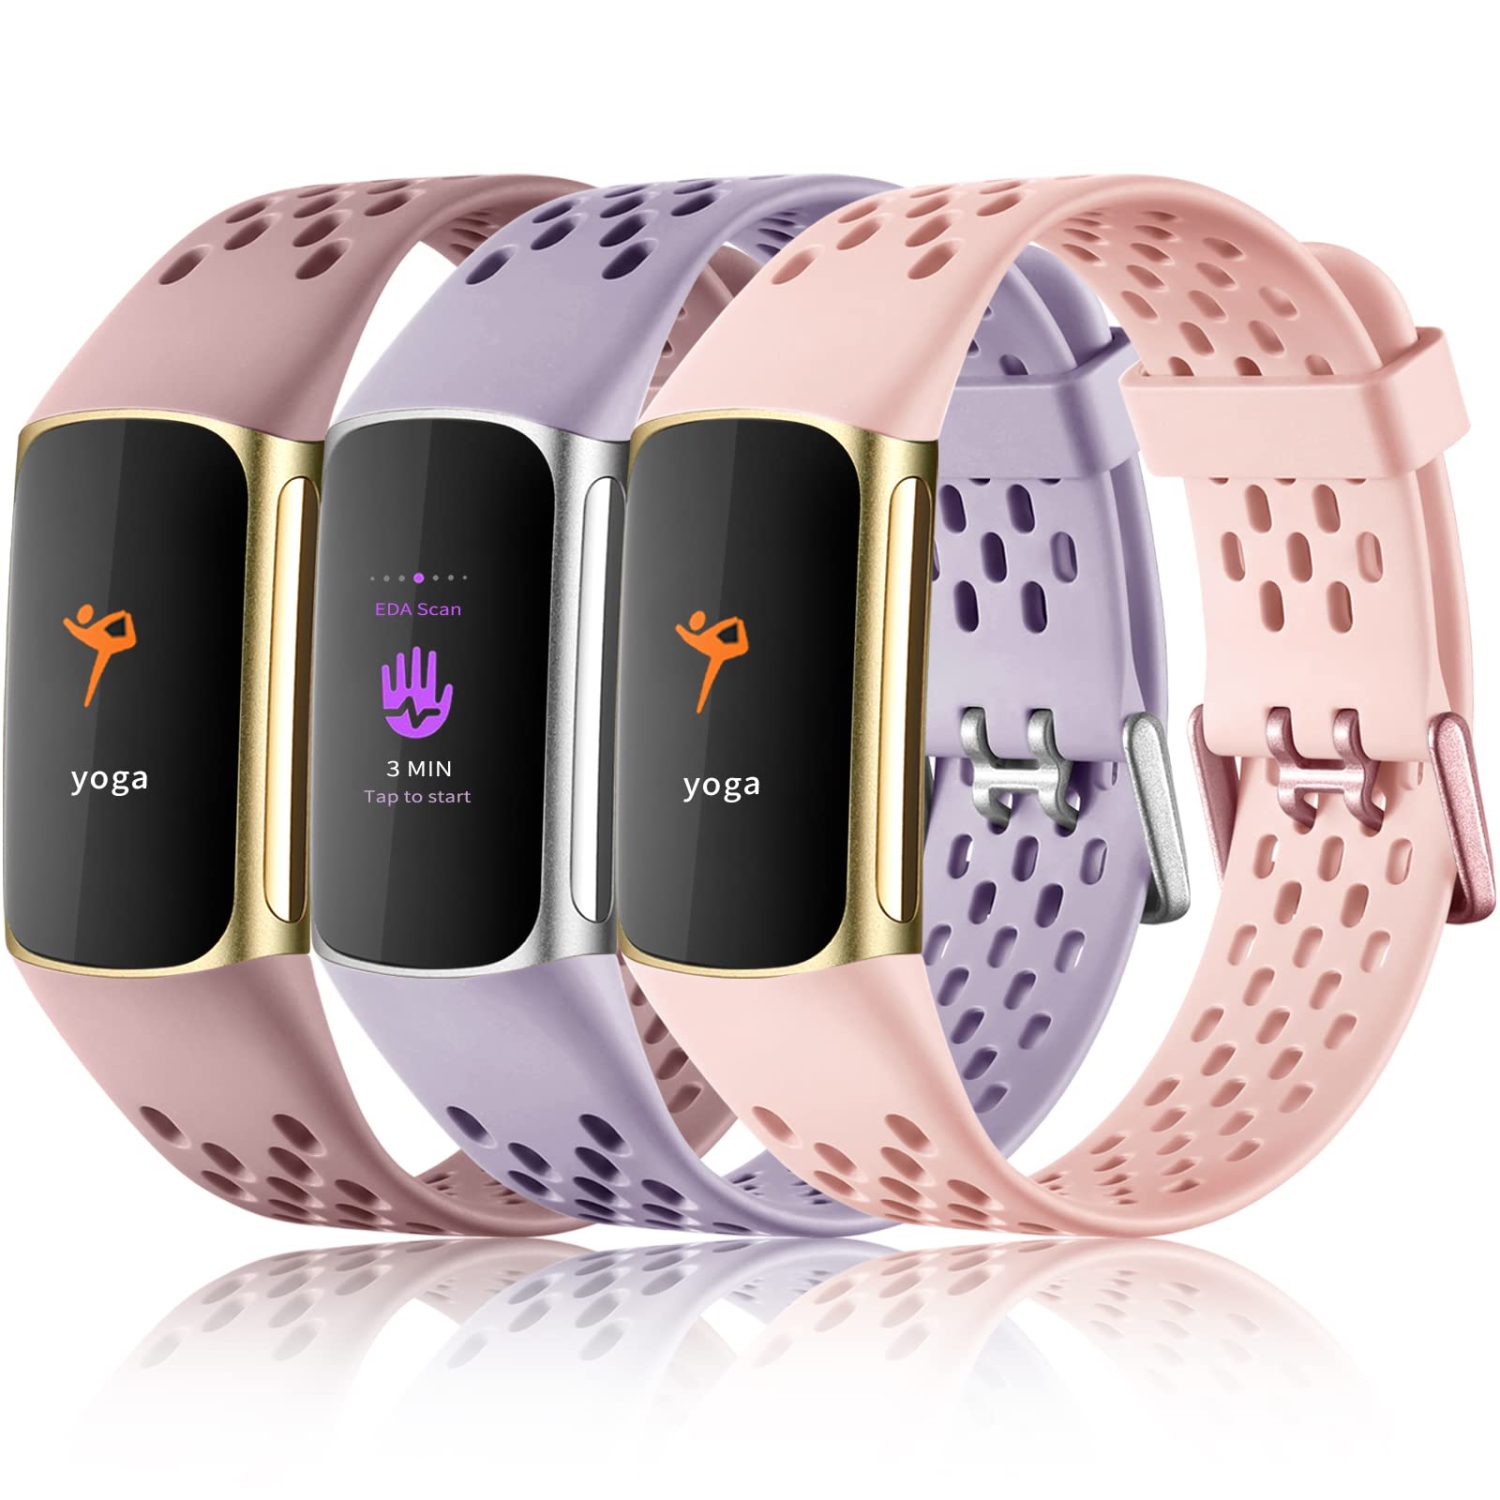 Fitbit Charge 5 Bands for Women Men, Breathable and Waterproof Wristband Replacement Bracelet Strap for Fitbit Charge 5 Fitness Tracker Accessories, 3 Packs